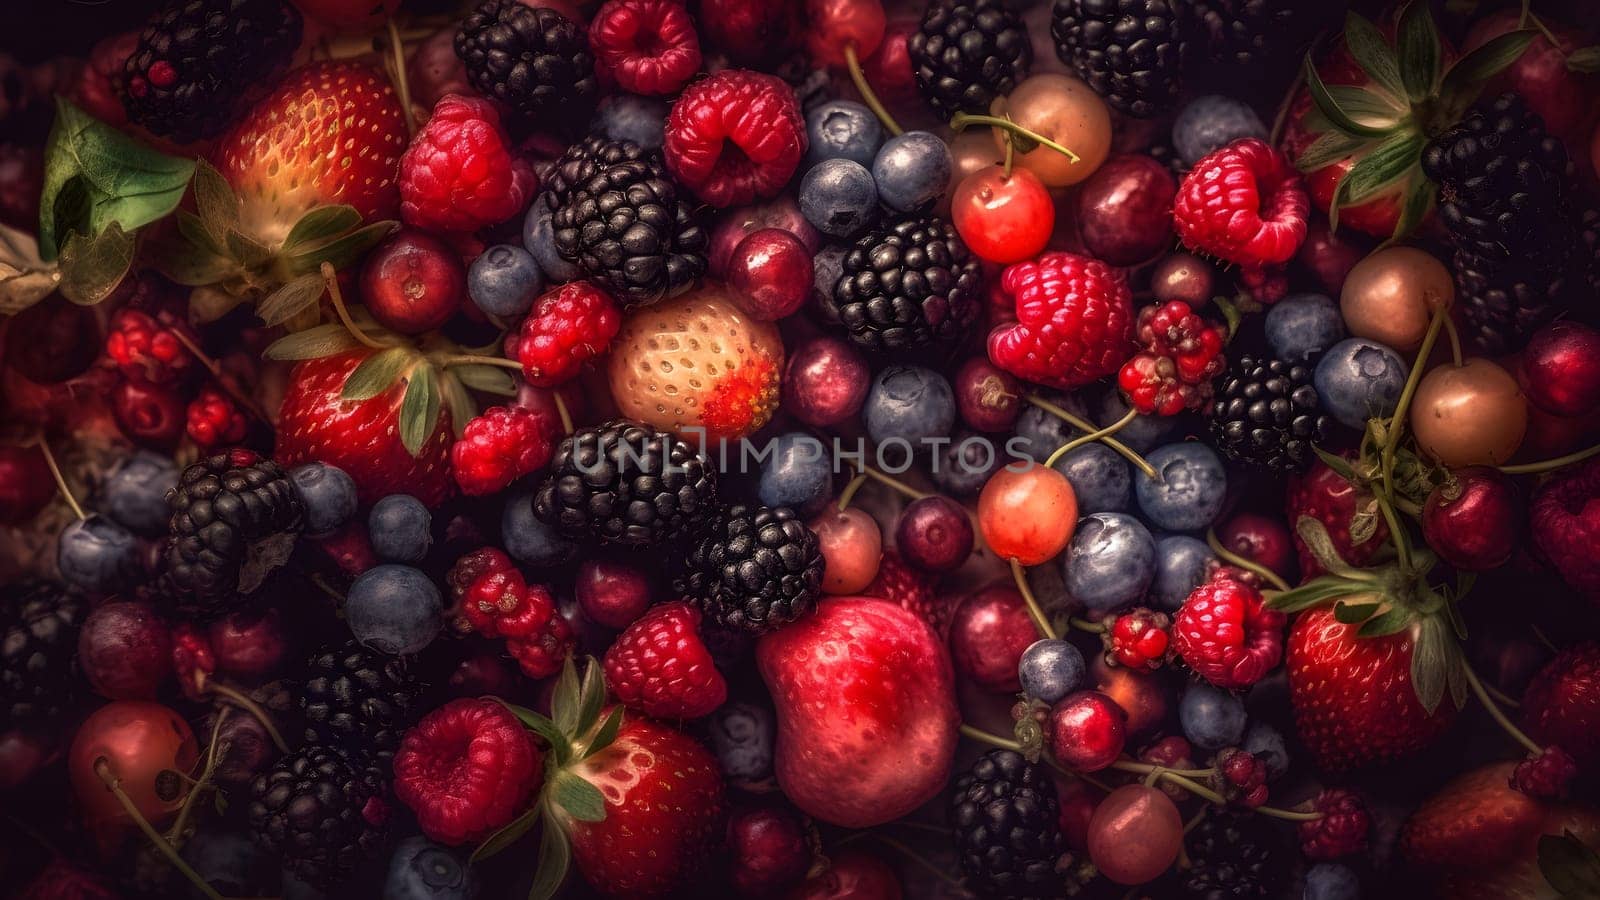 Berry mix photorealistic colorful full-frame closeup high angle view background, neural network generated image by z1b